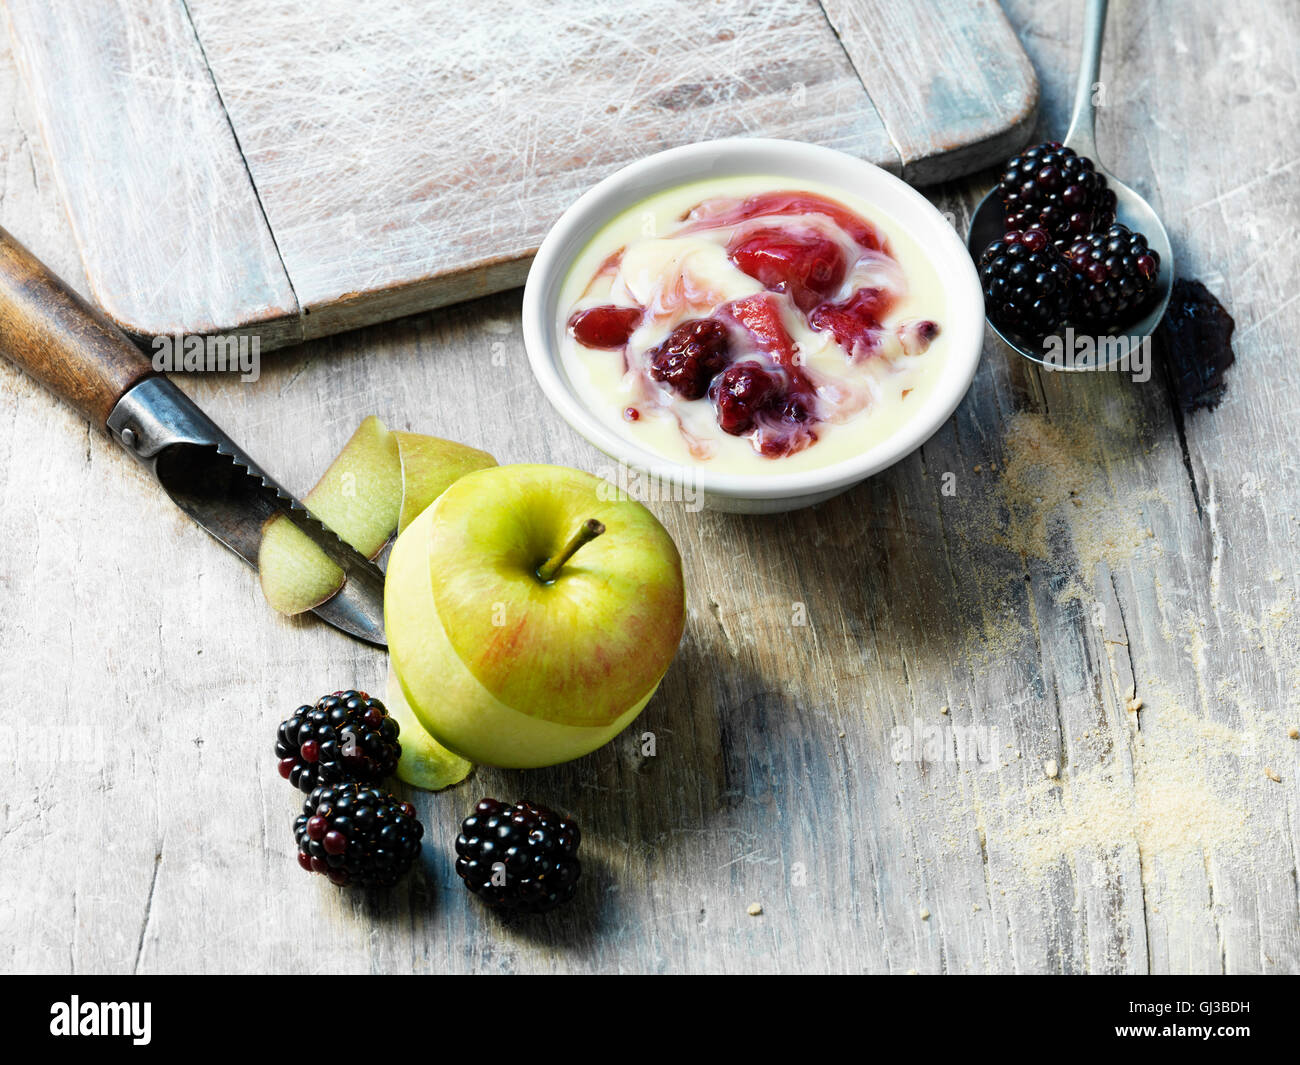 Apple with skin peeled, blackberries, apple and blackberry custard, white washed and scratched wooden surface Stock Photo